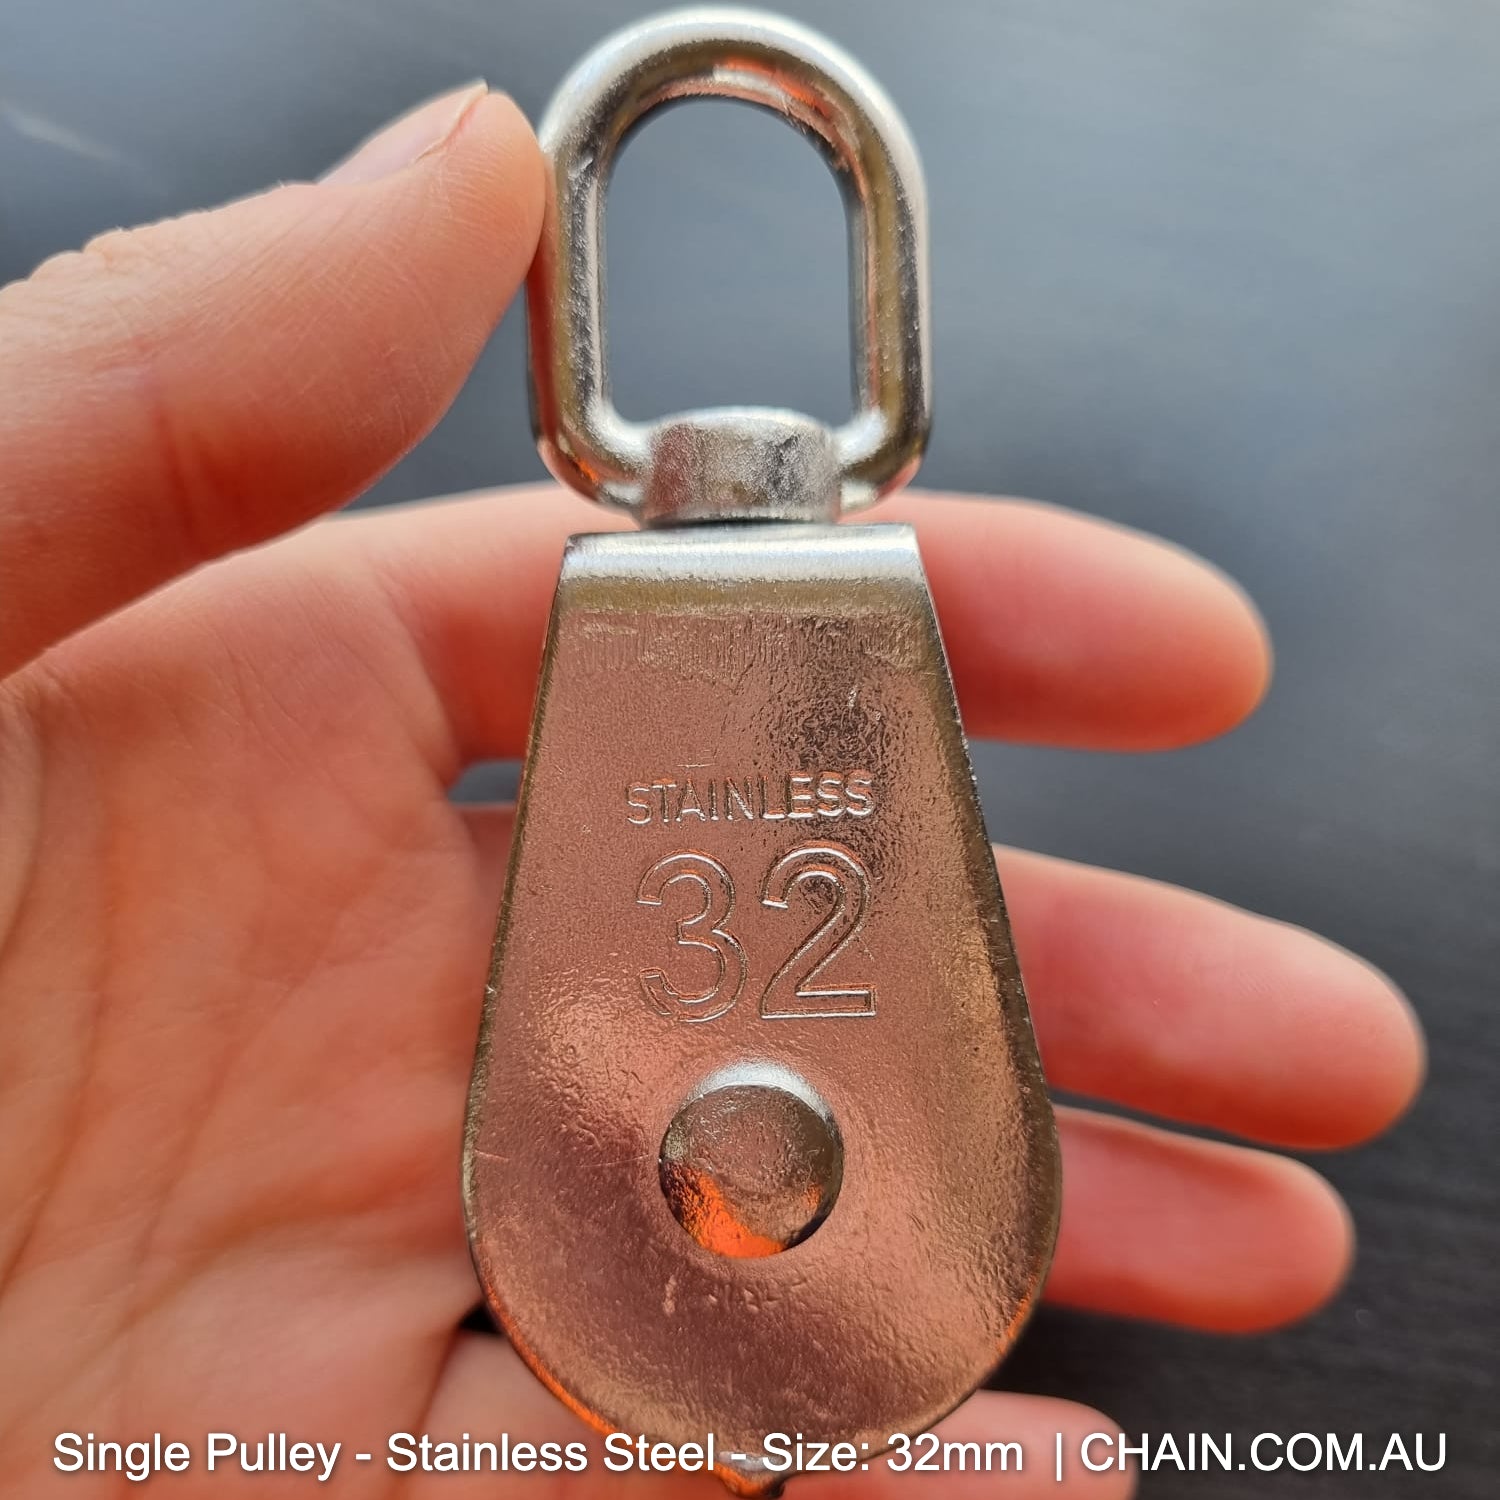 Single Pully 32mm made of marine grade type 316 stainless steel. Melbourne Australia.